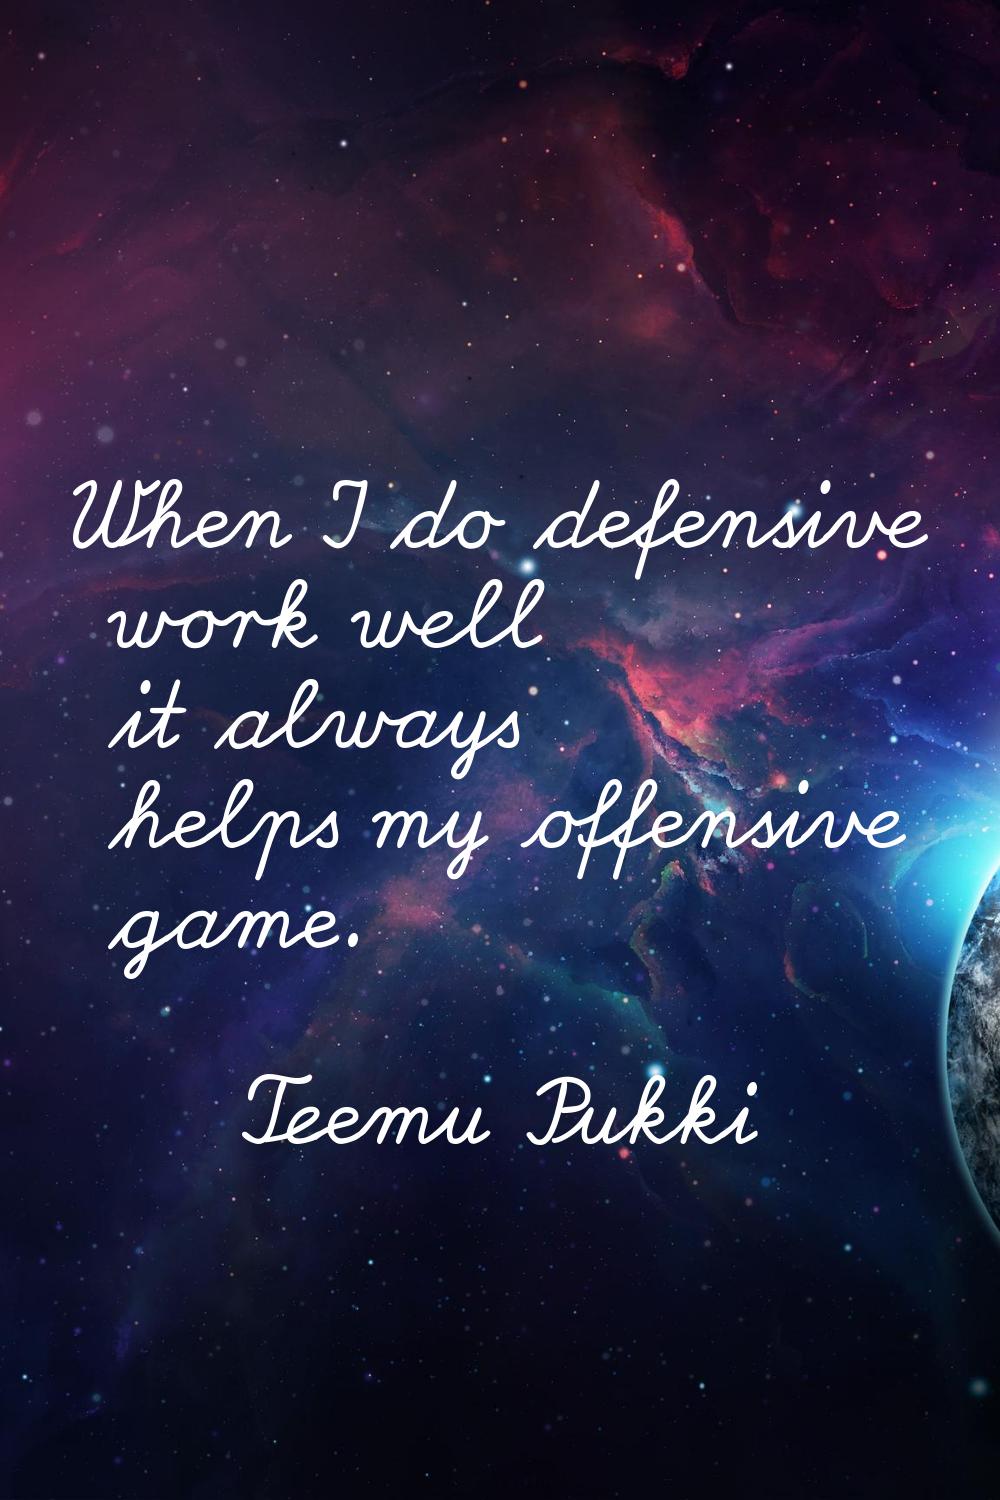 When I do defensive work well it always helps my offensive game.